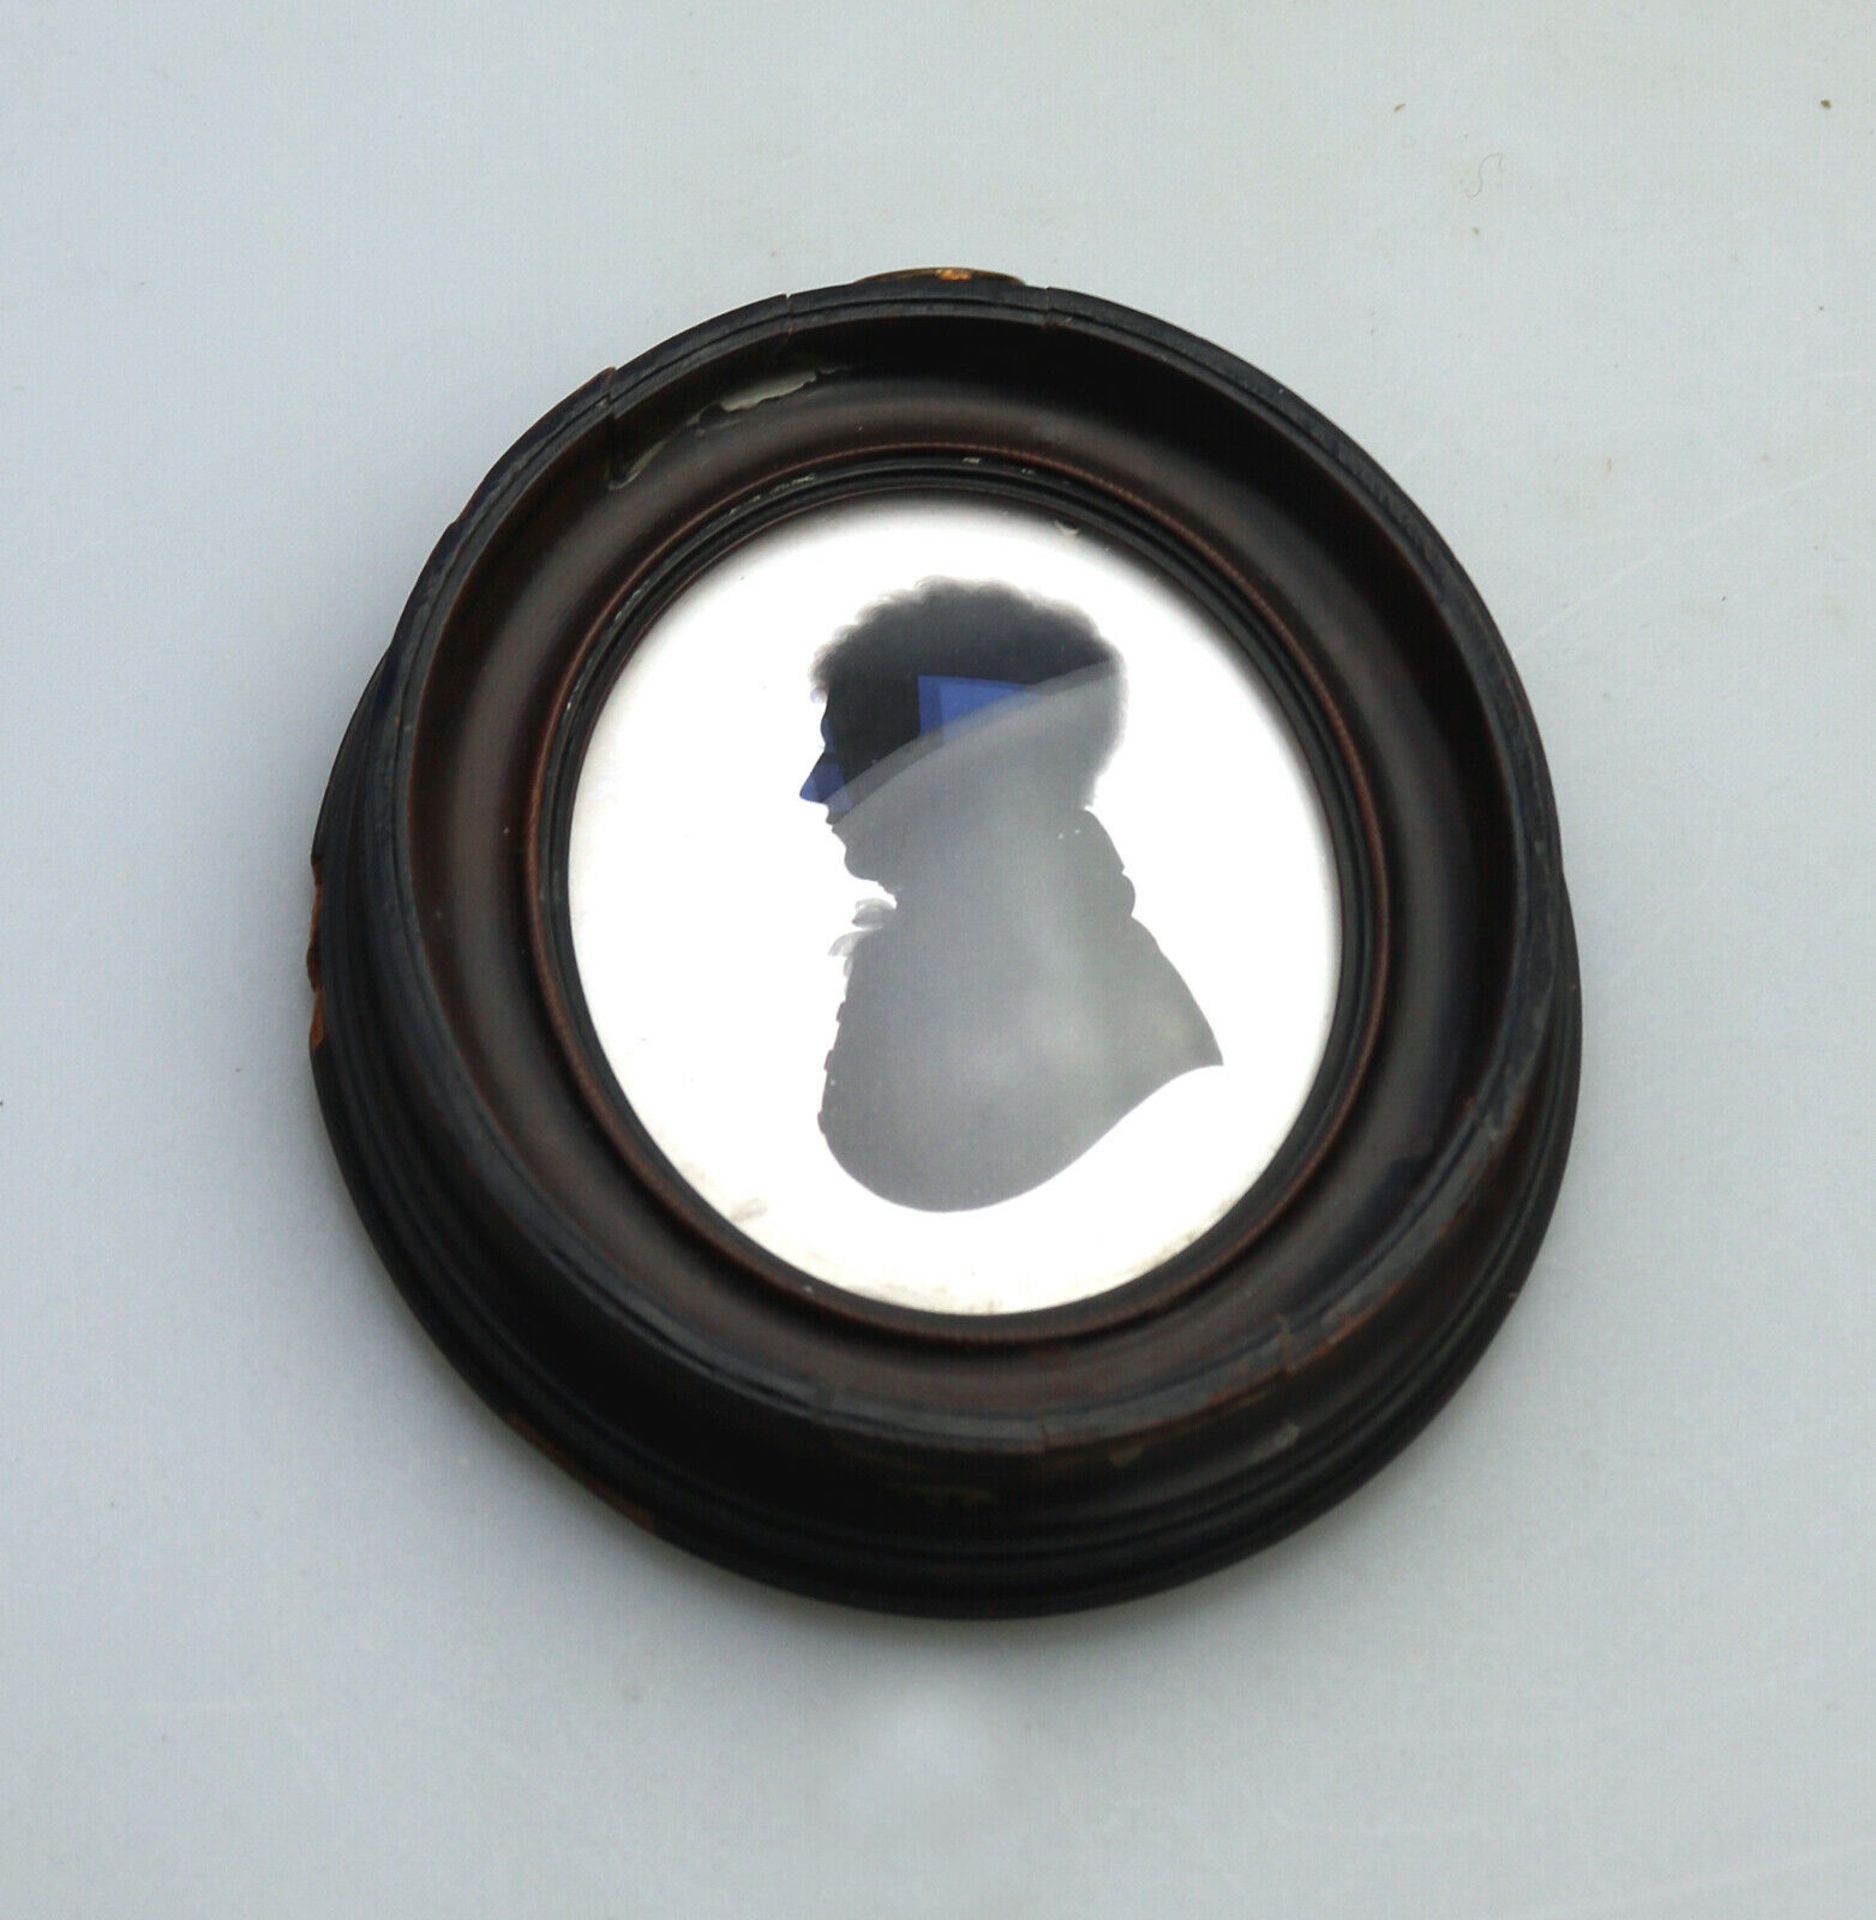 Georgian Silhouette attributed John Miers Portrait - 1 19thC - Image 3 of 4